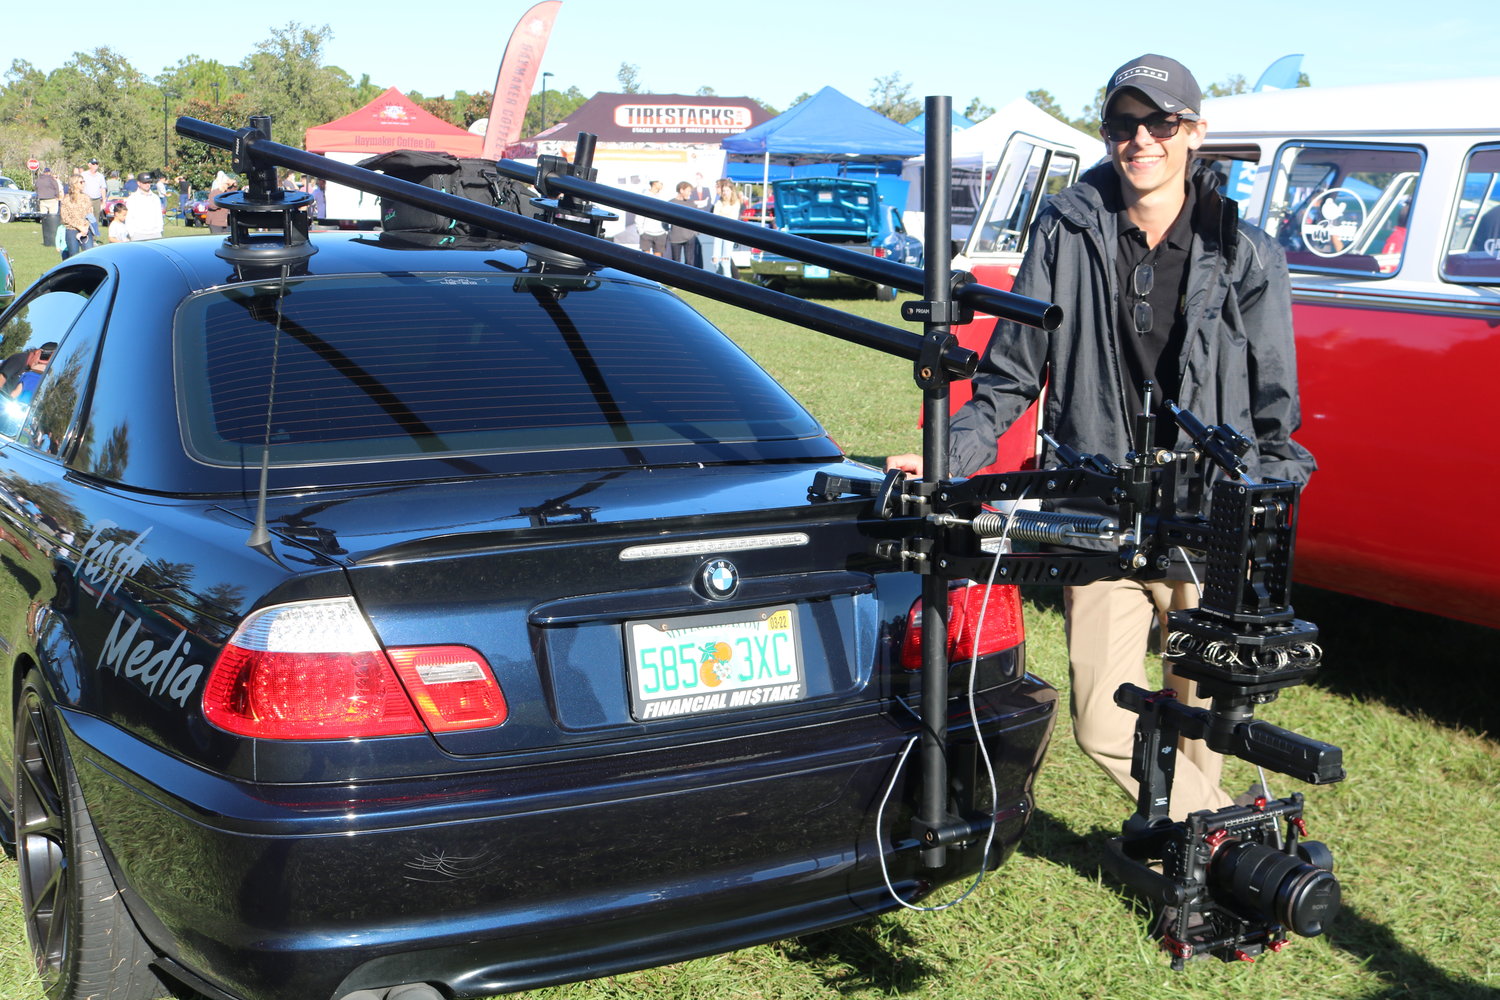 The 2005 BMW used for Dylan Lane’s “camera car” was passed down by his grandfather, who he credits for developing his passion for cars.